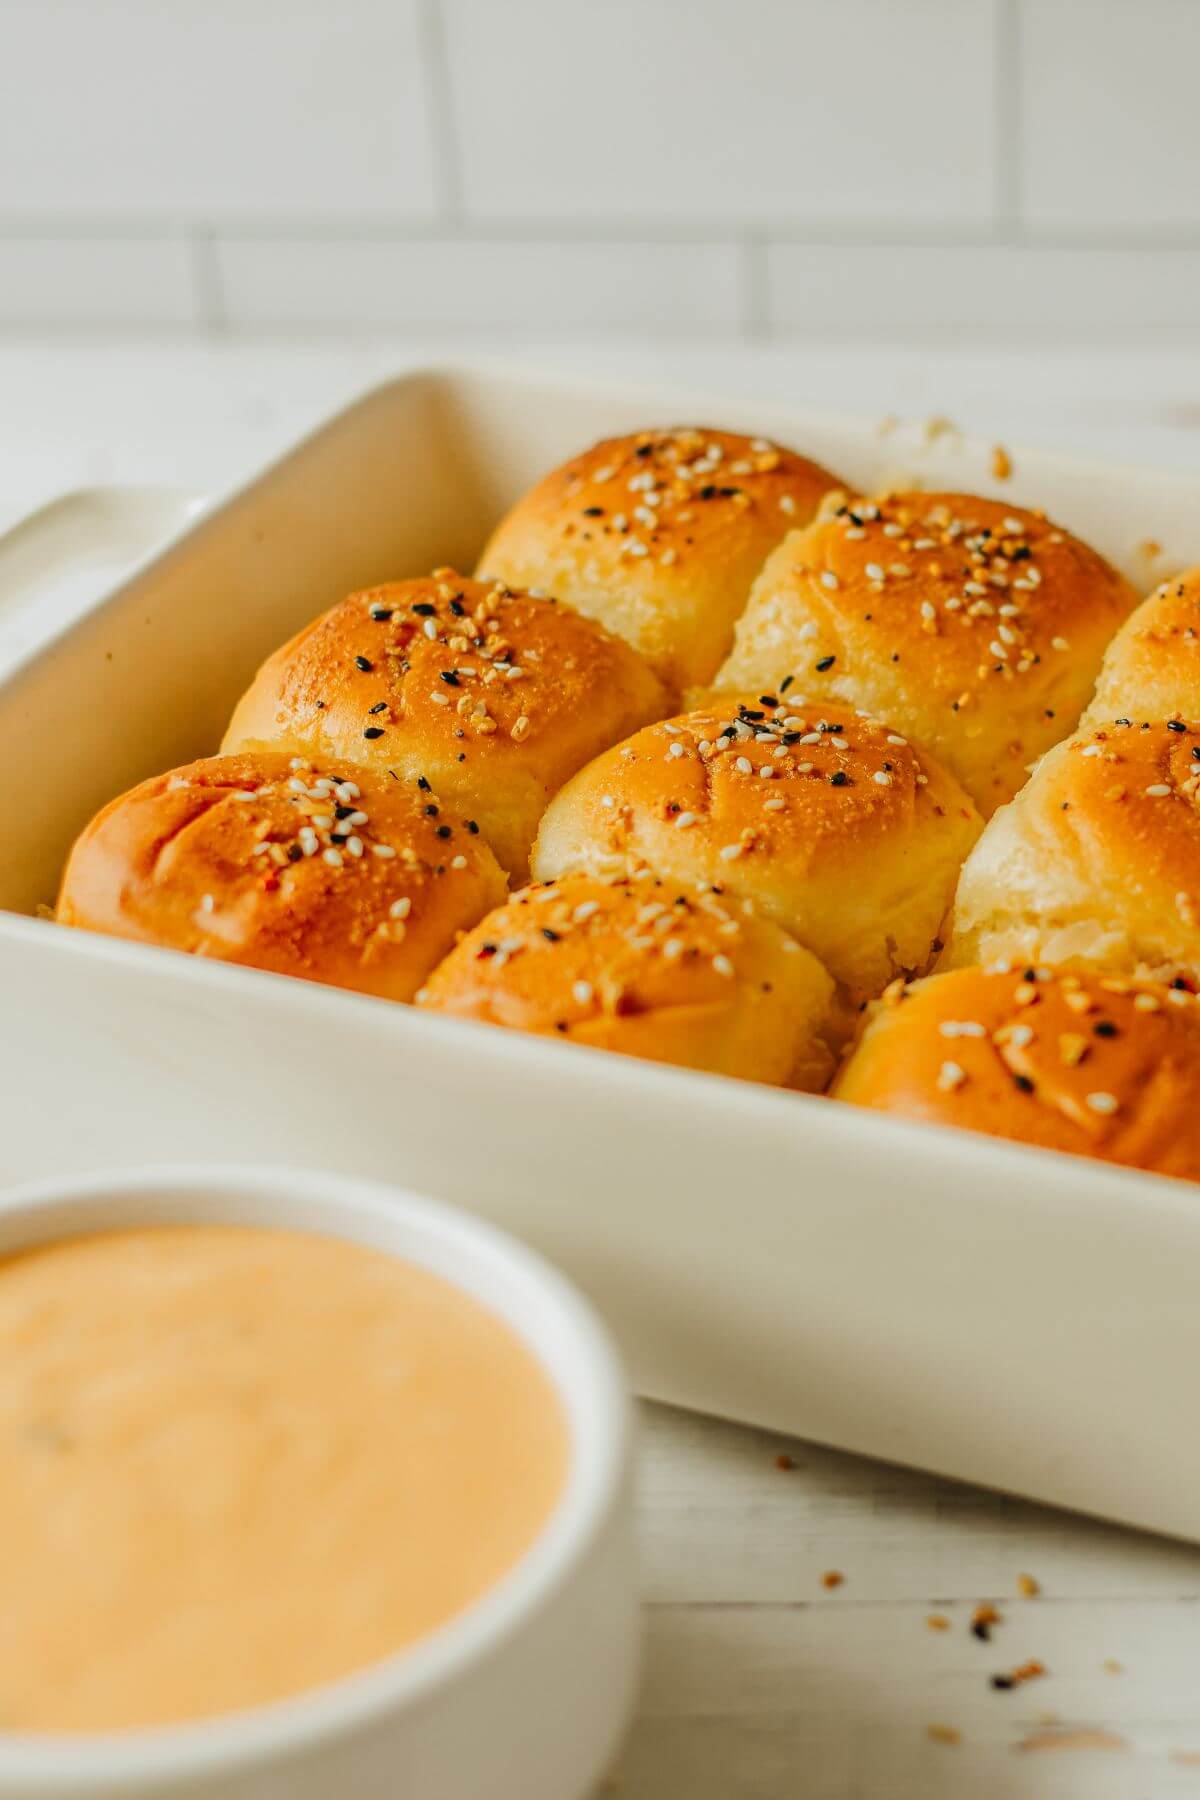 A pan of baked sliders shows Everything but the Bagel seasoning on top.